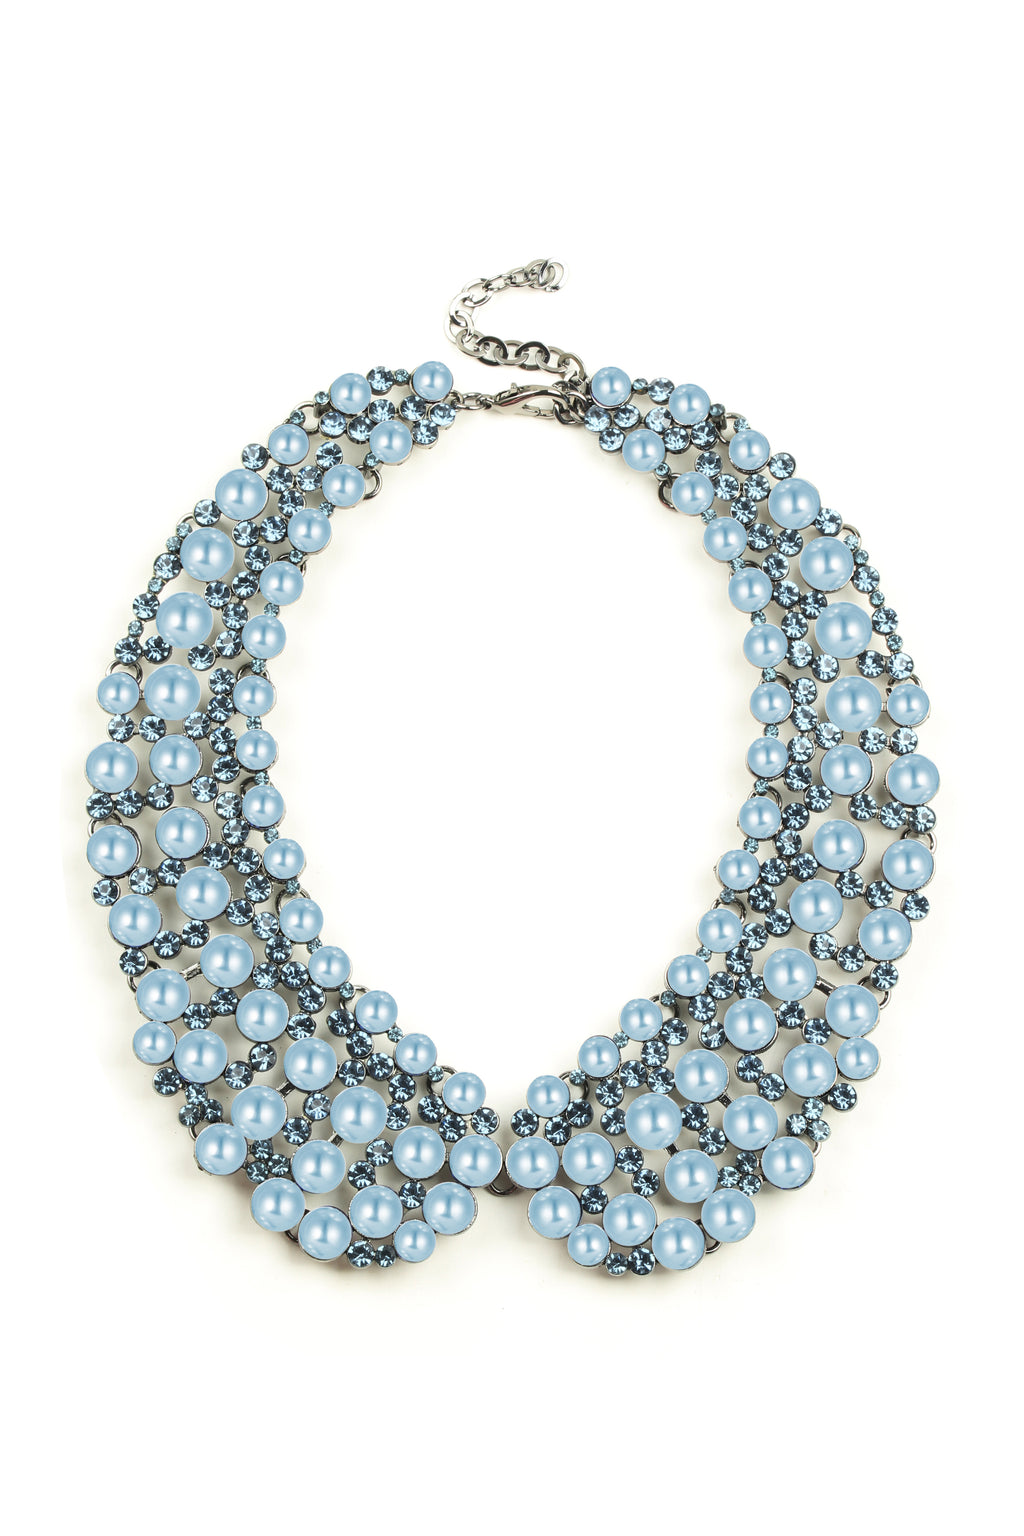 Blue glass pearl statement collar necklace.